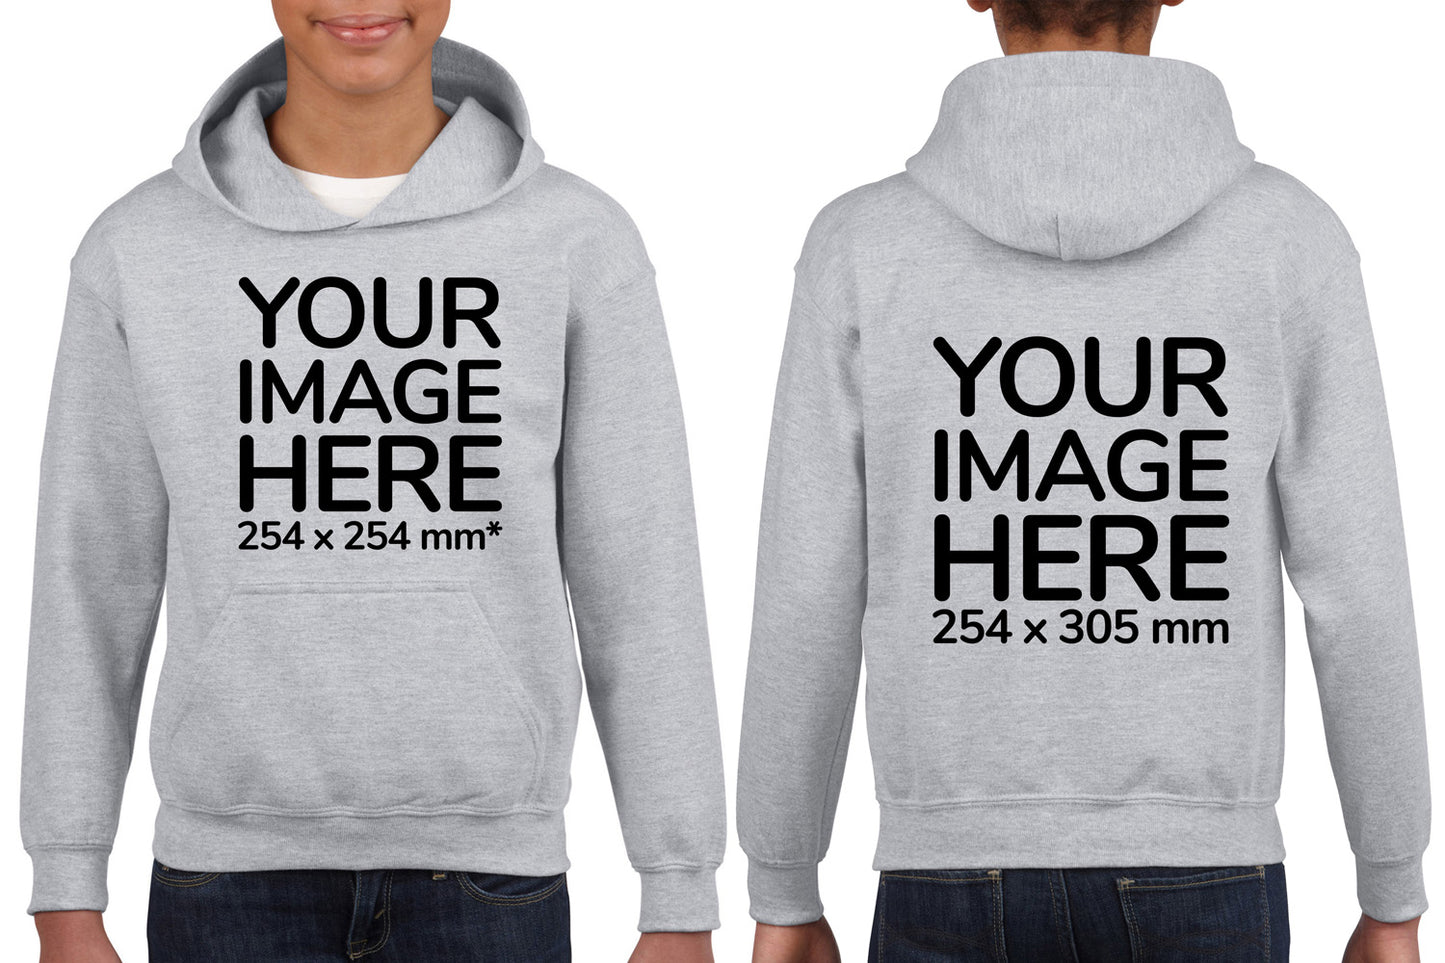 Children's Hoodie - Front and Back